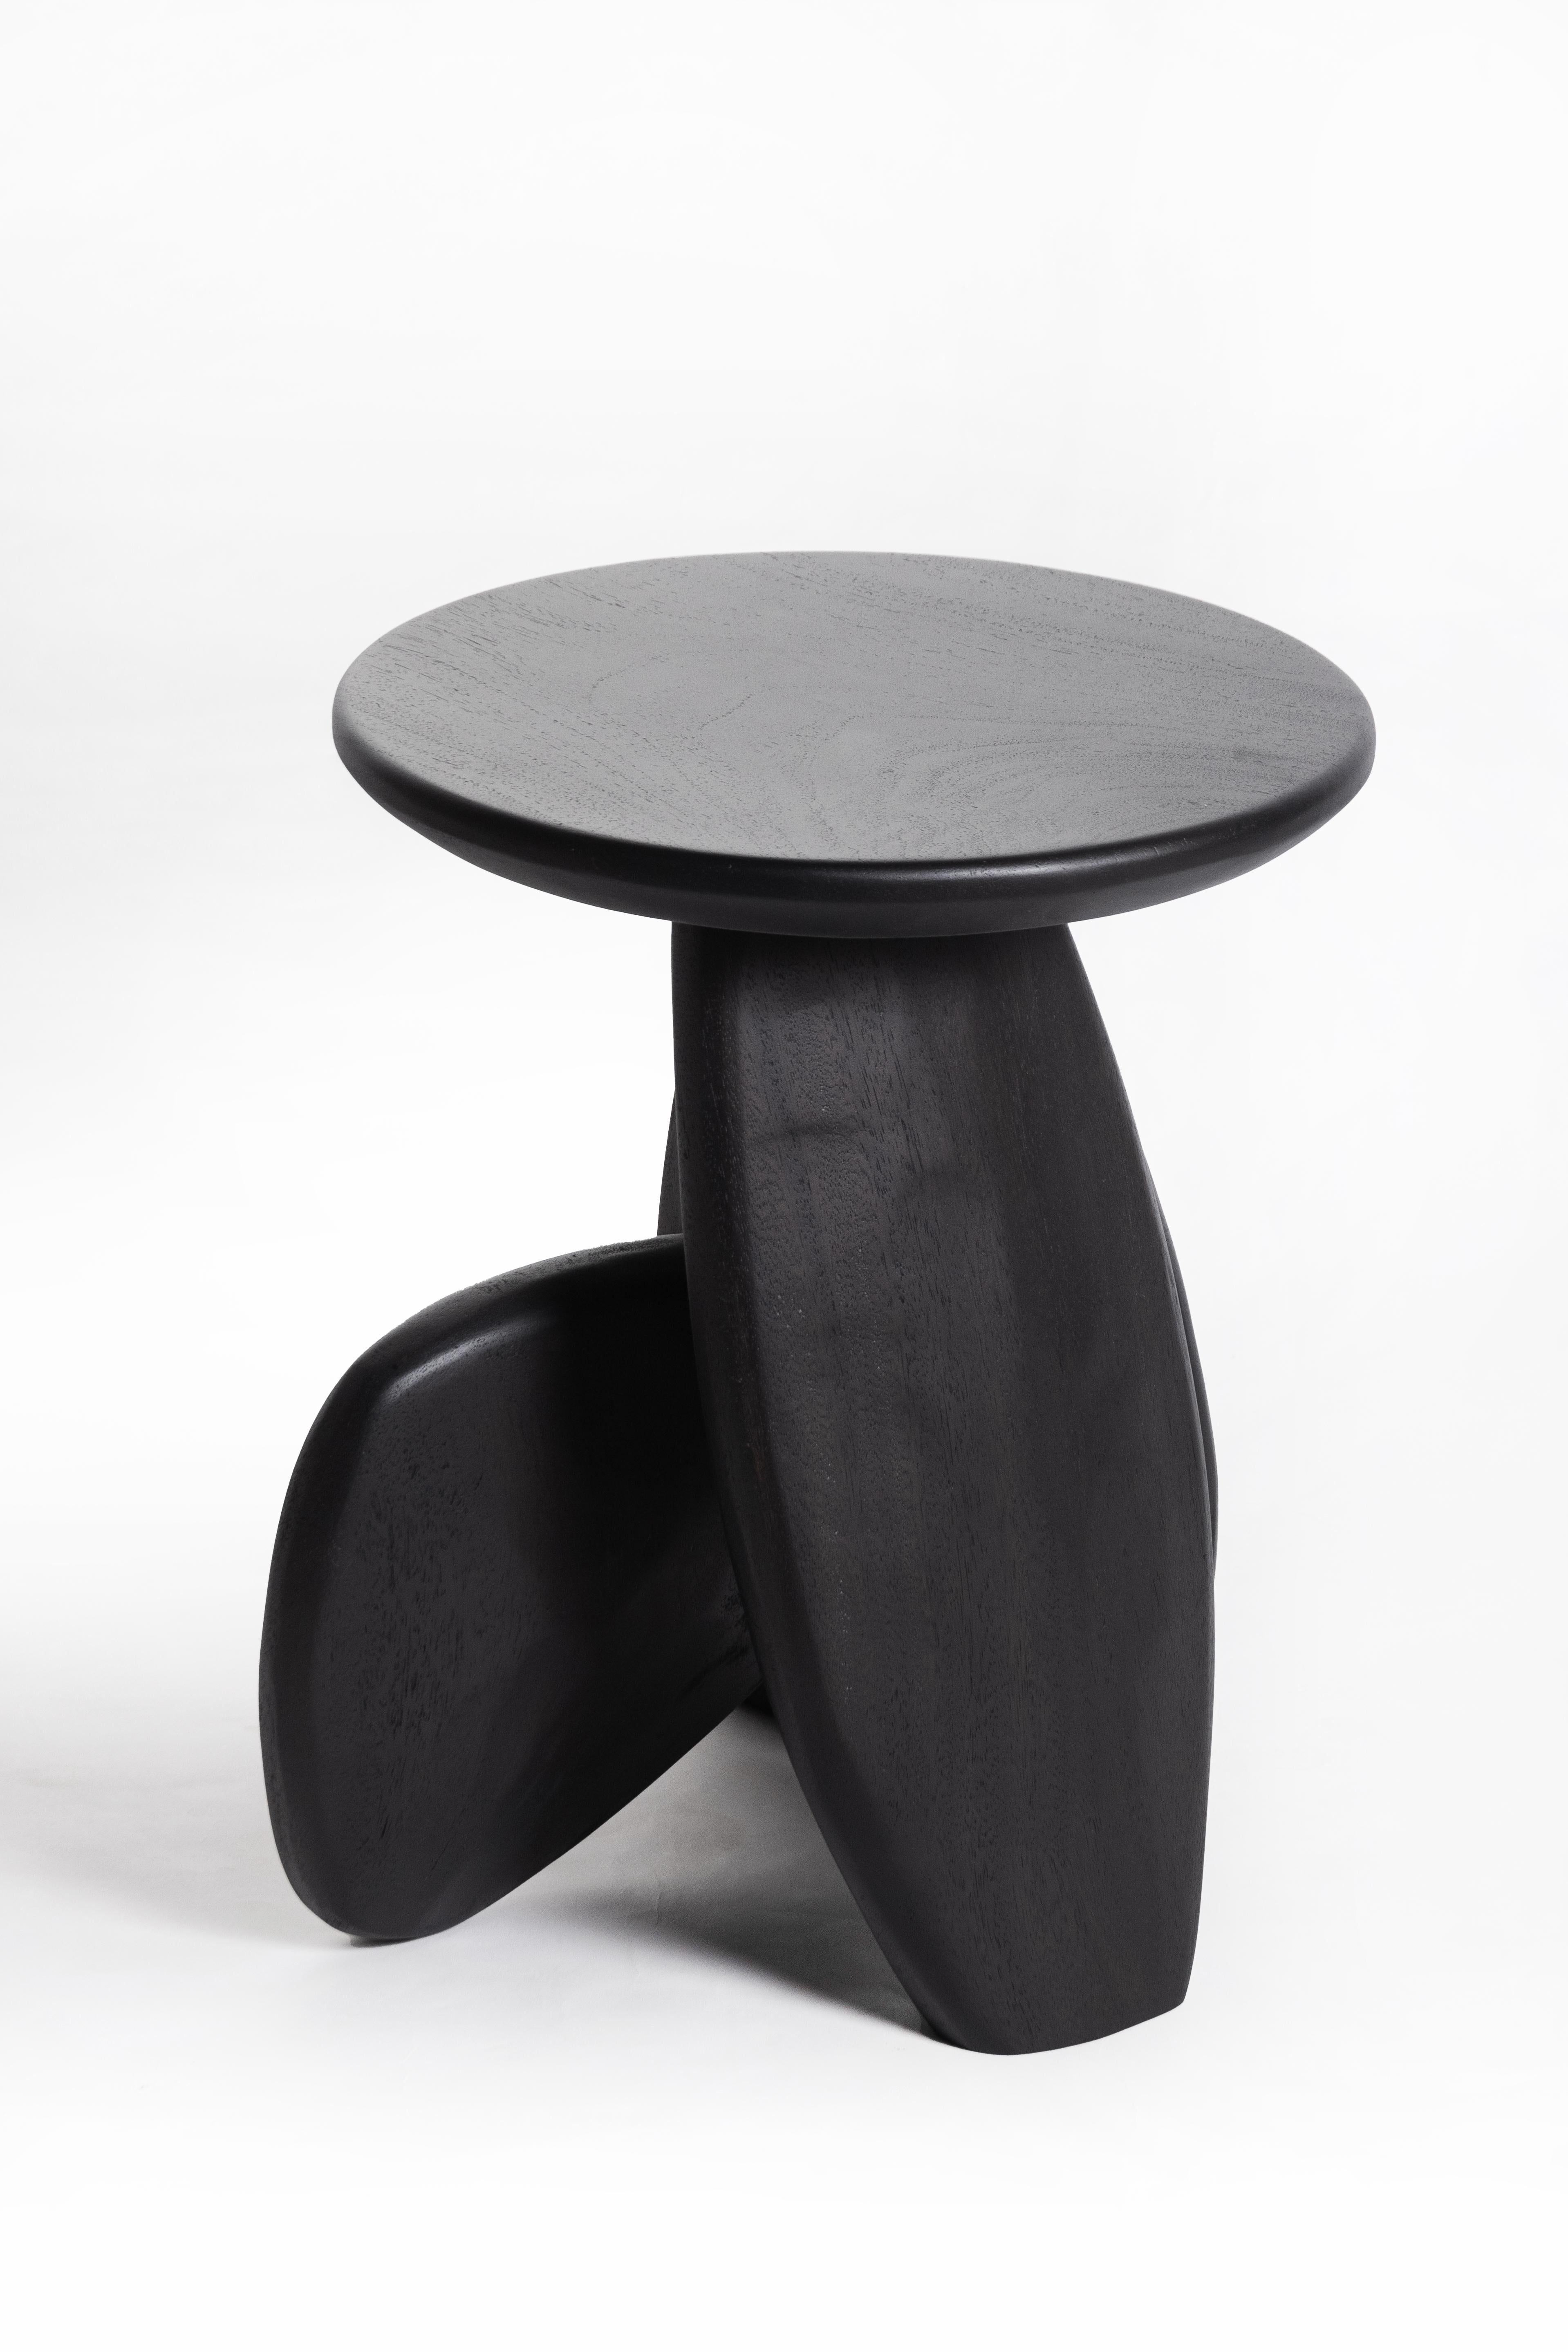 Hand-Crafted Pebble Stool Type 01, Charcoal Black Wood Finishing For Sale